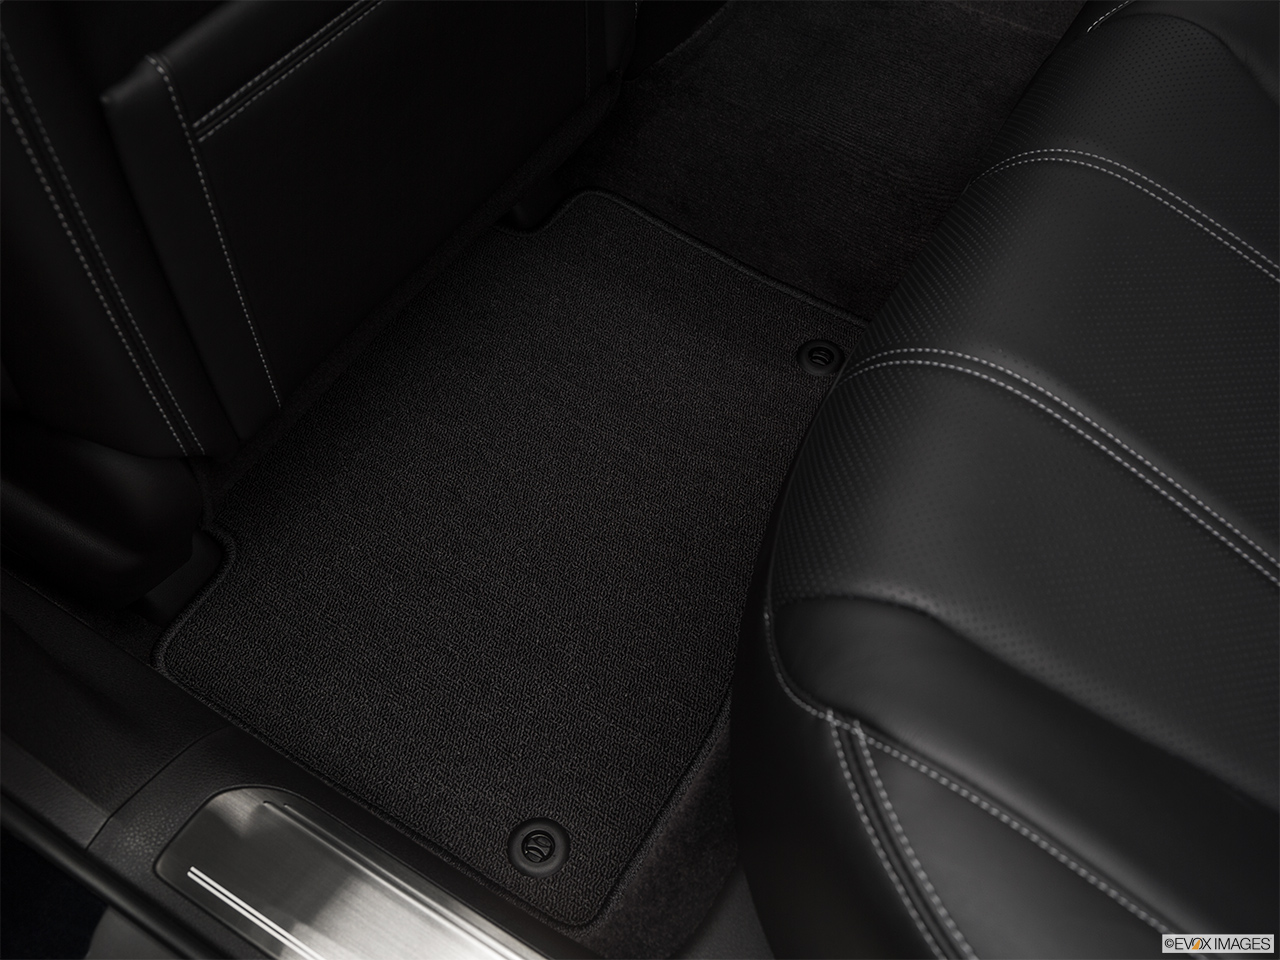 2019 Acura RLX Base Rear driver's side floor mat. Mid-seat level from outside looking in. 